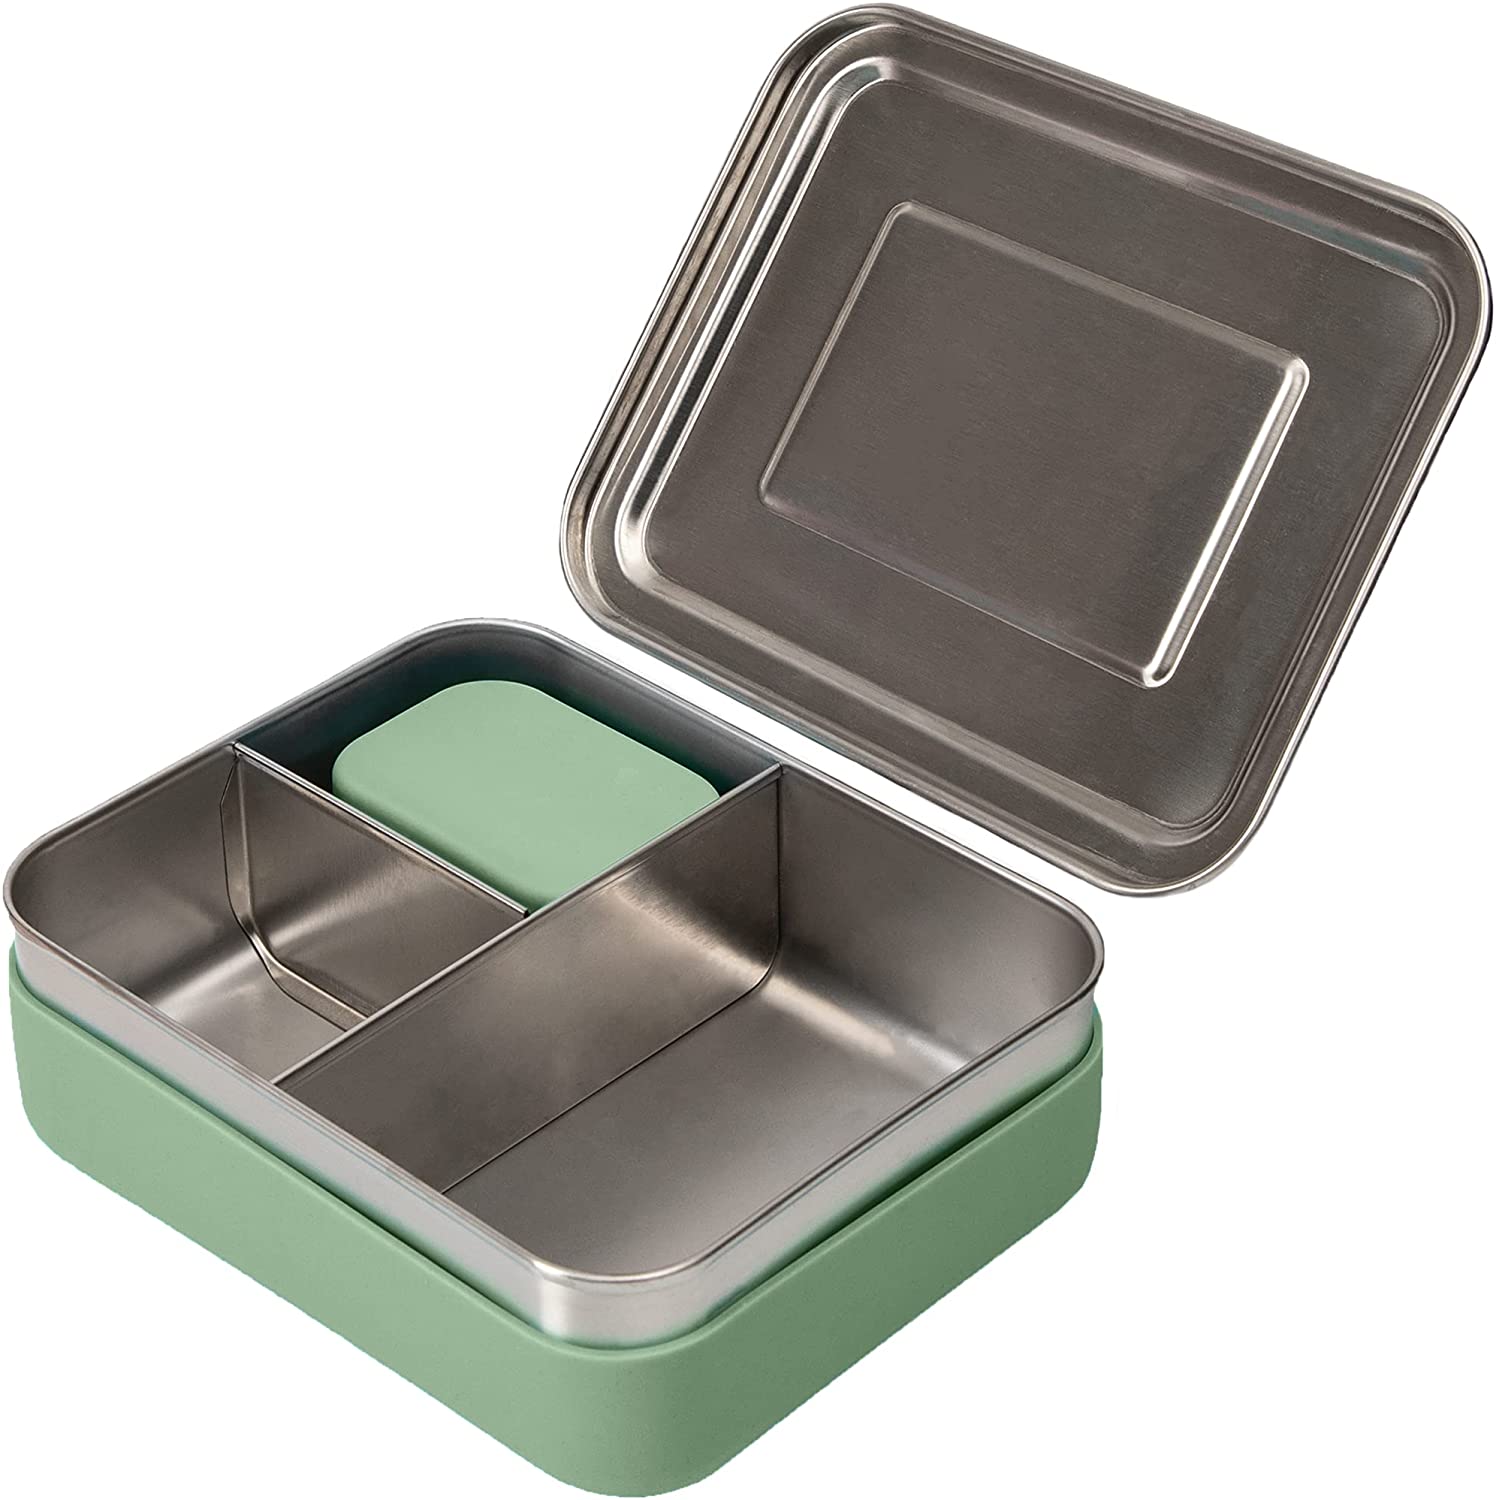 WeeSprout 18/8 Stainless Steel Food Containers | Leakproof | Set of 3, Blue